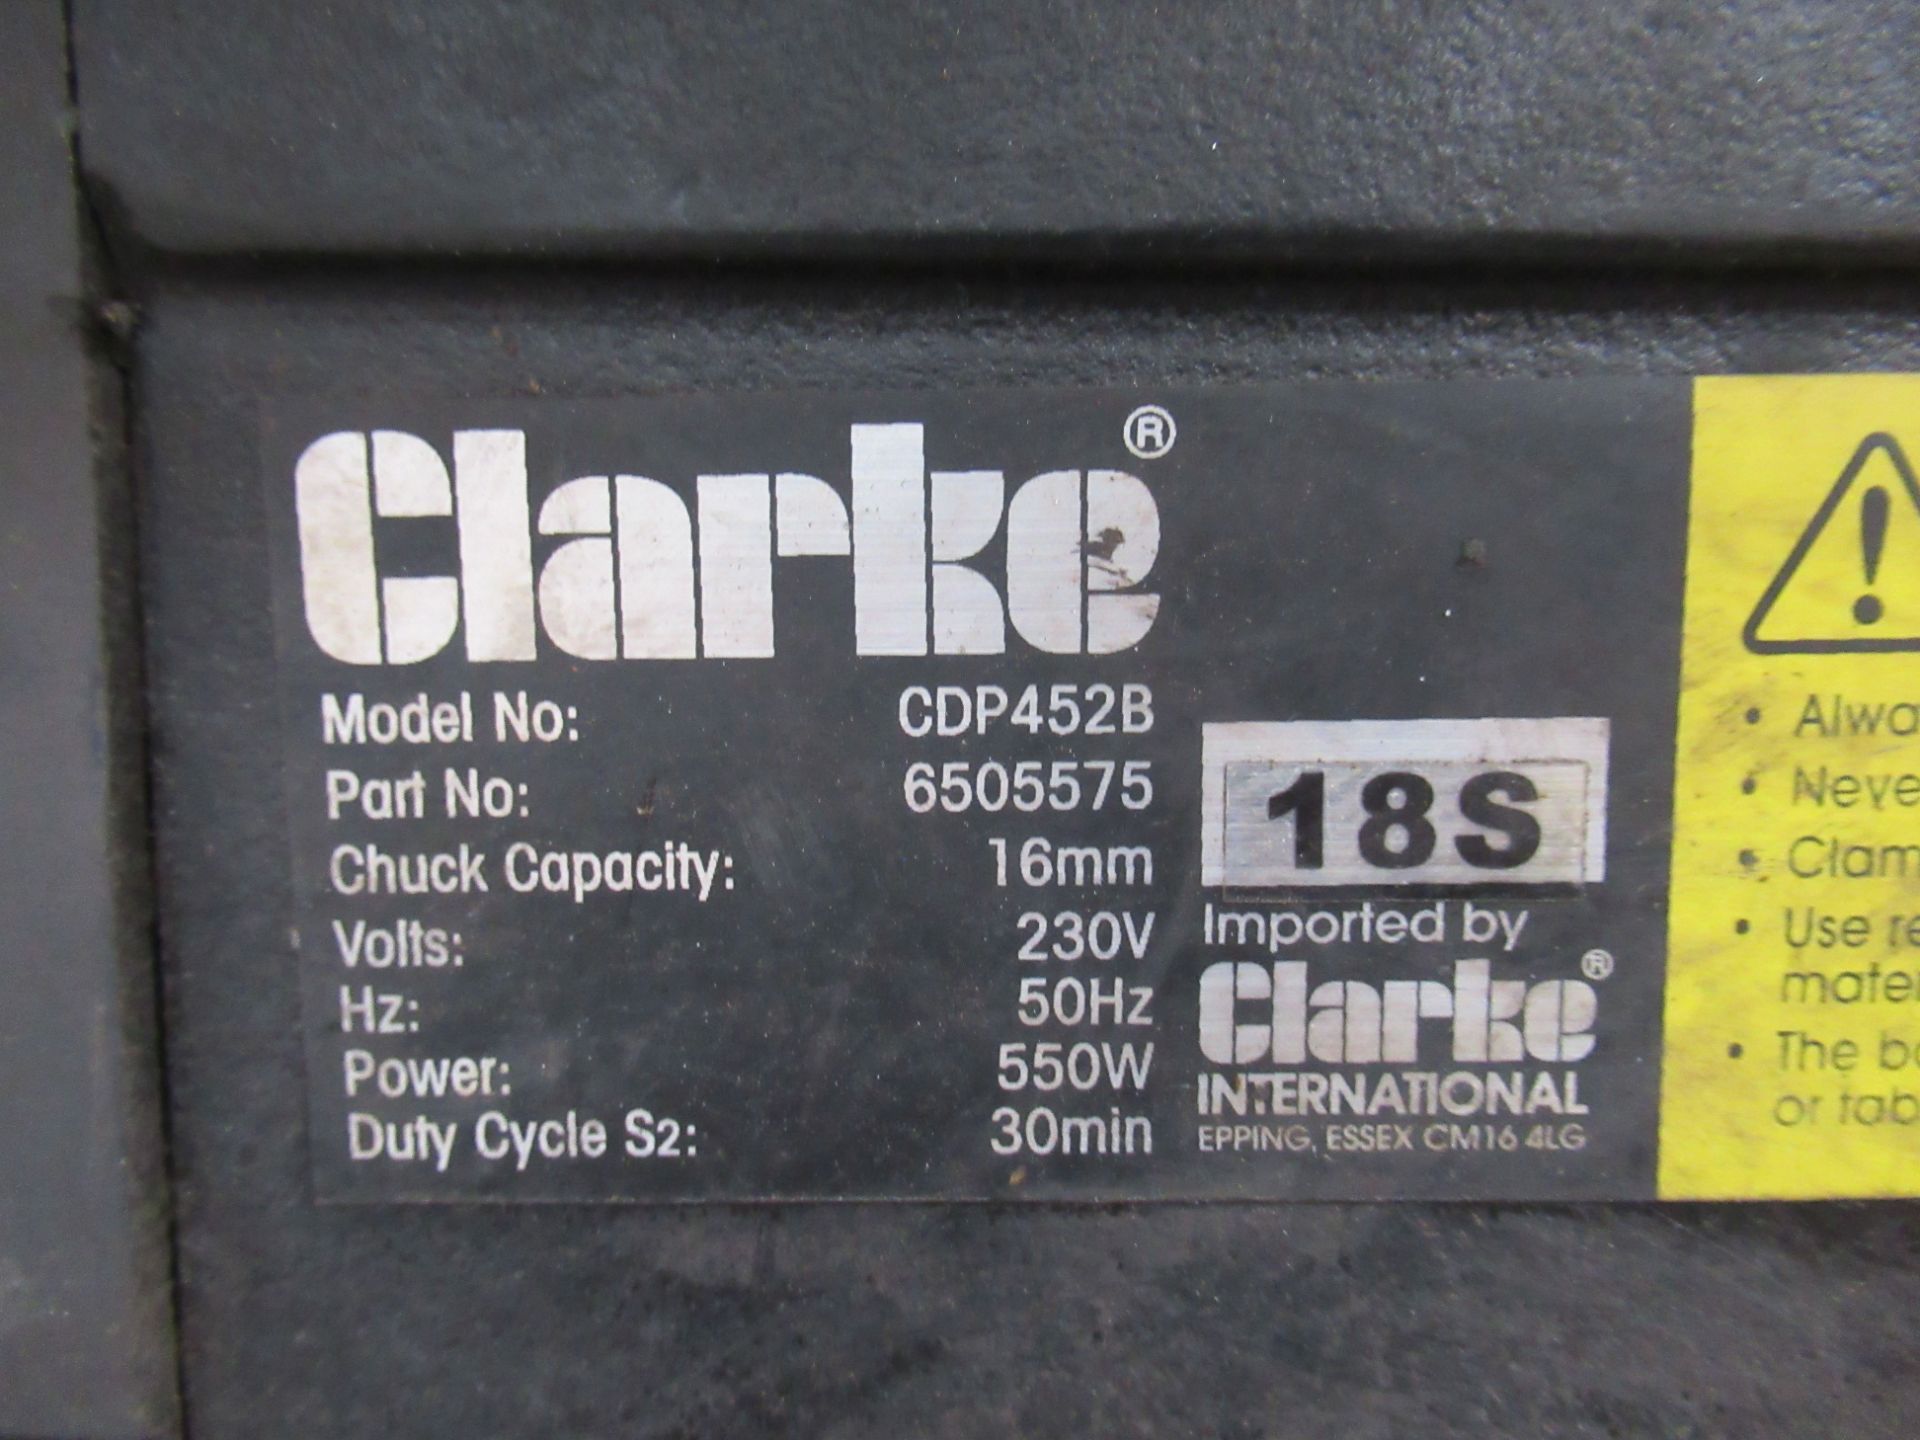 Clarke 'Metalworker' CDP452B Pedestal Drill - 230V - Fabricated to frame - Image 2 of 4